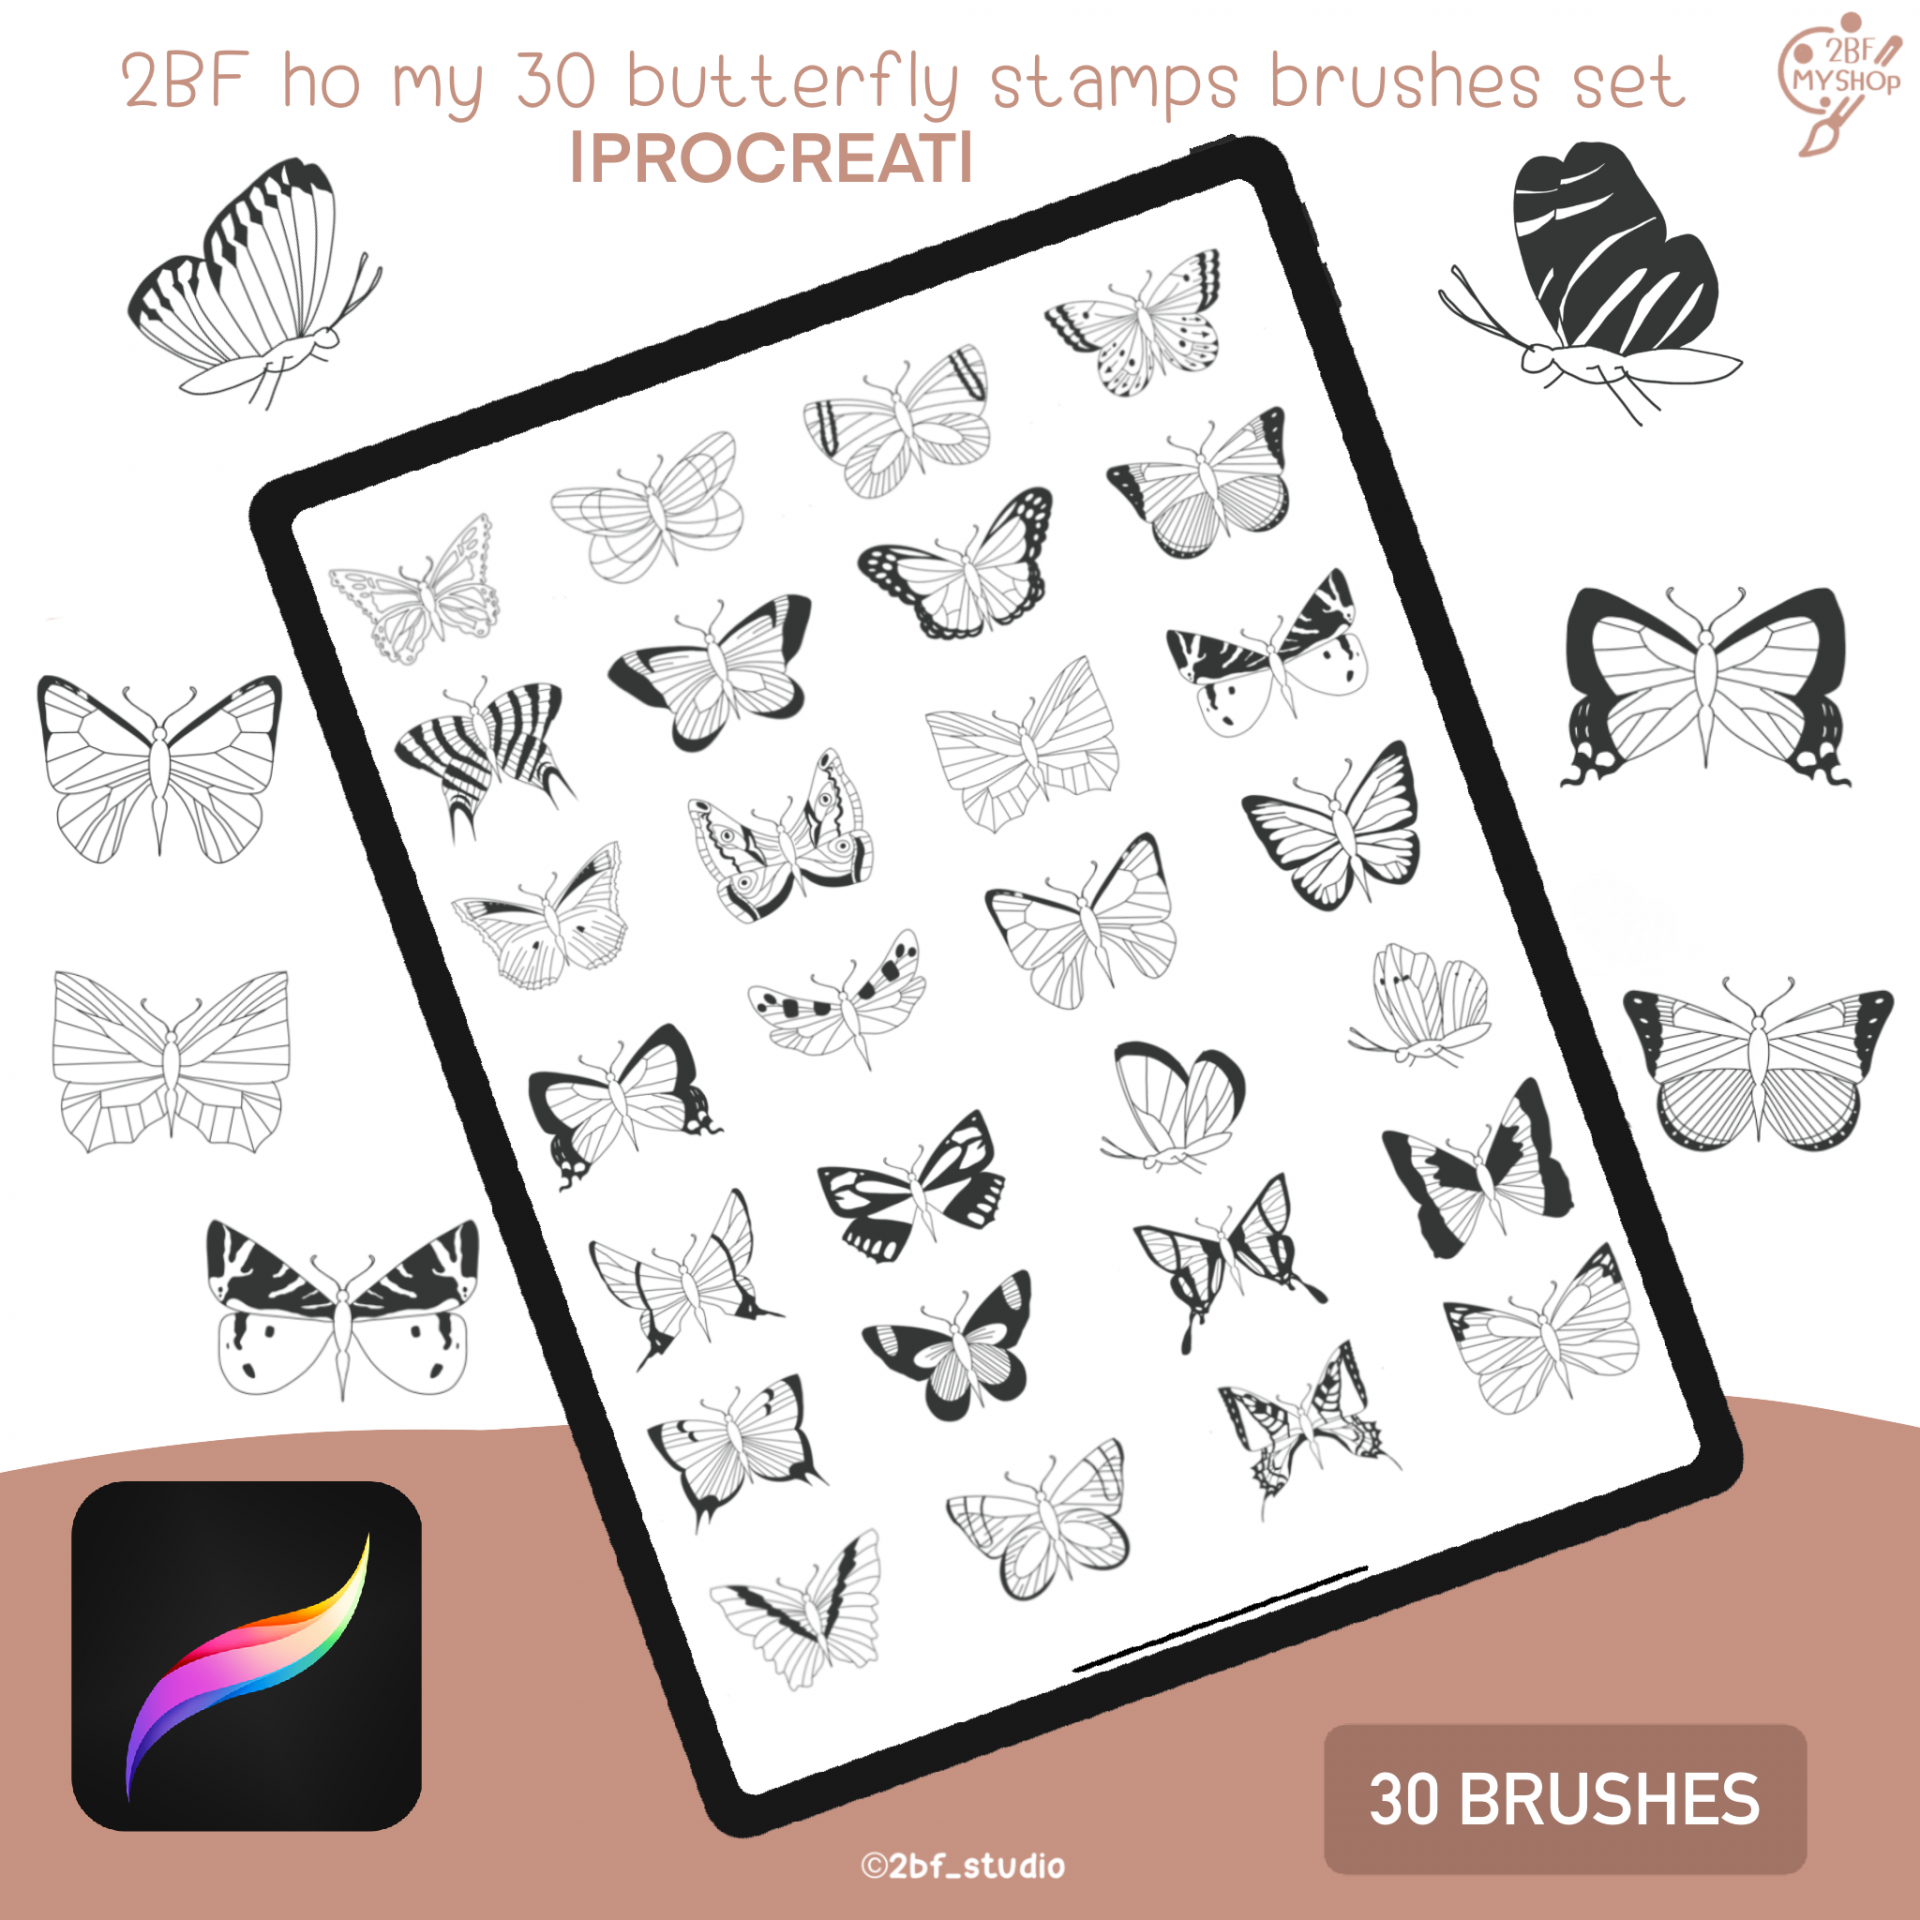 2BF ho my 30 butterfly stamps brushes set   |PROCREAT BRUSHED|